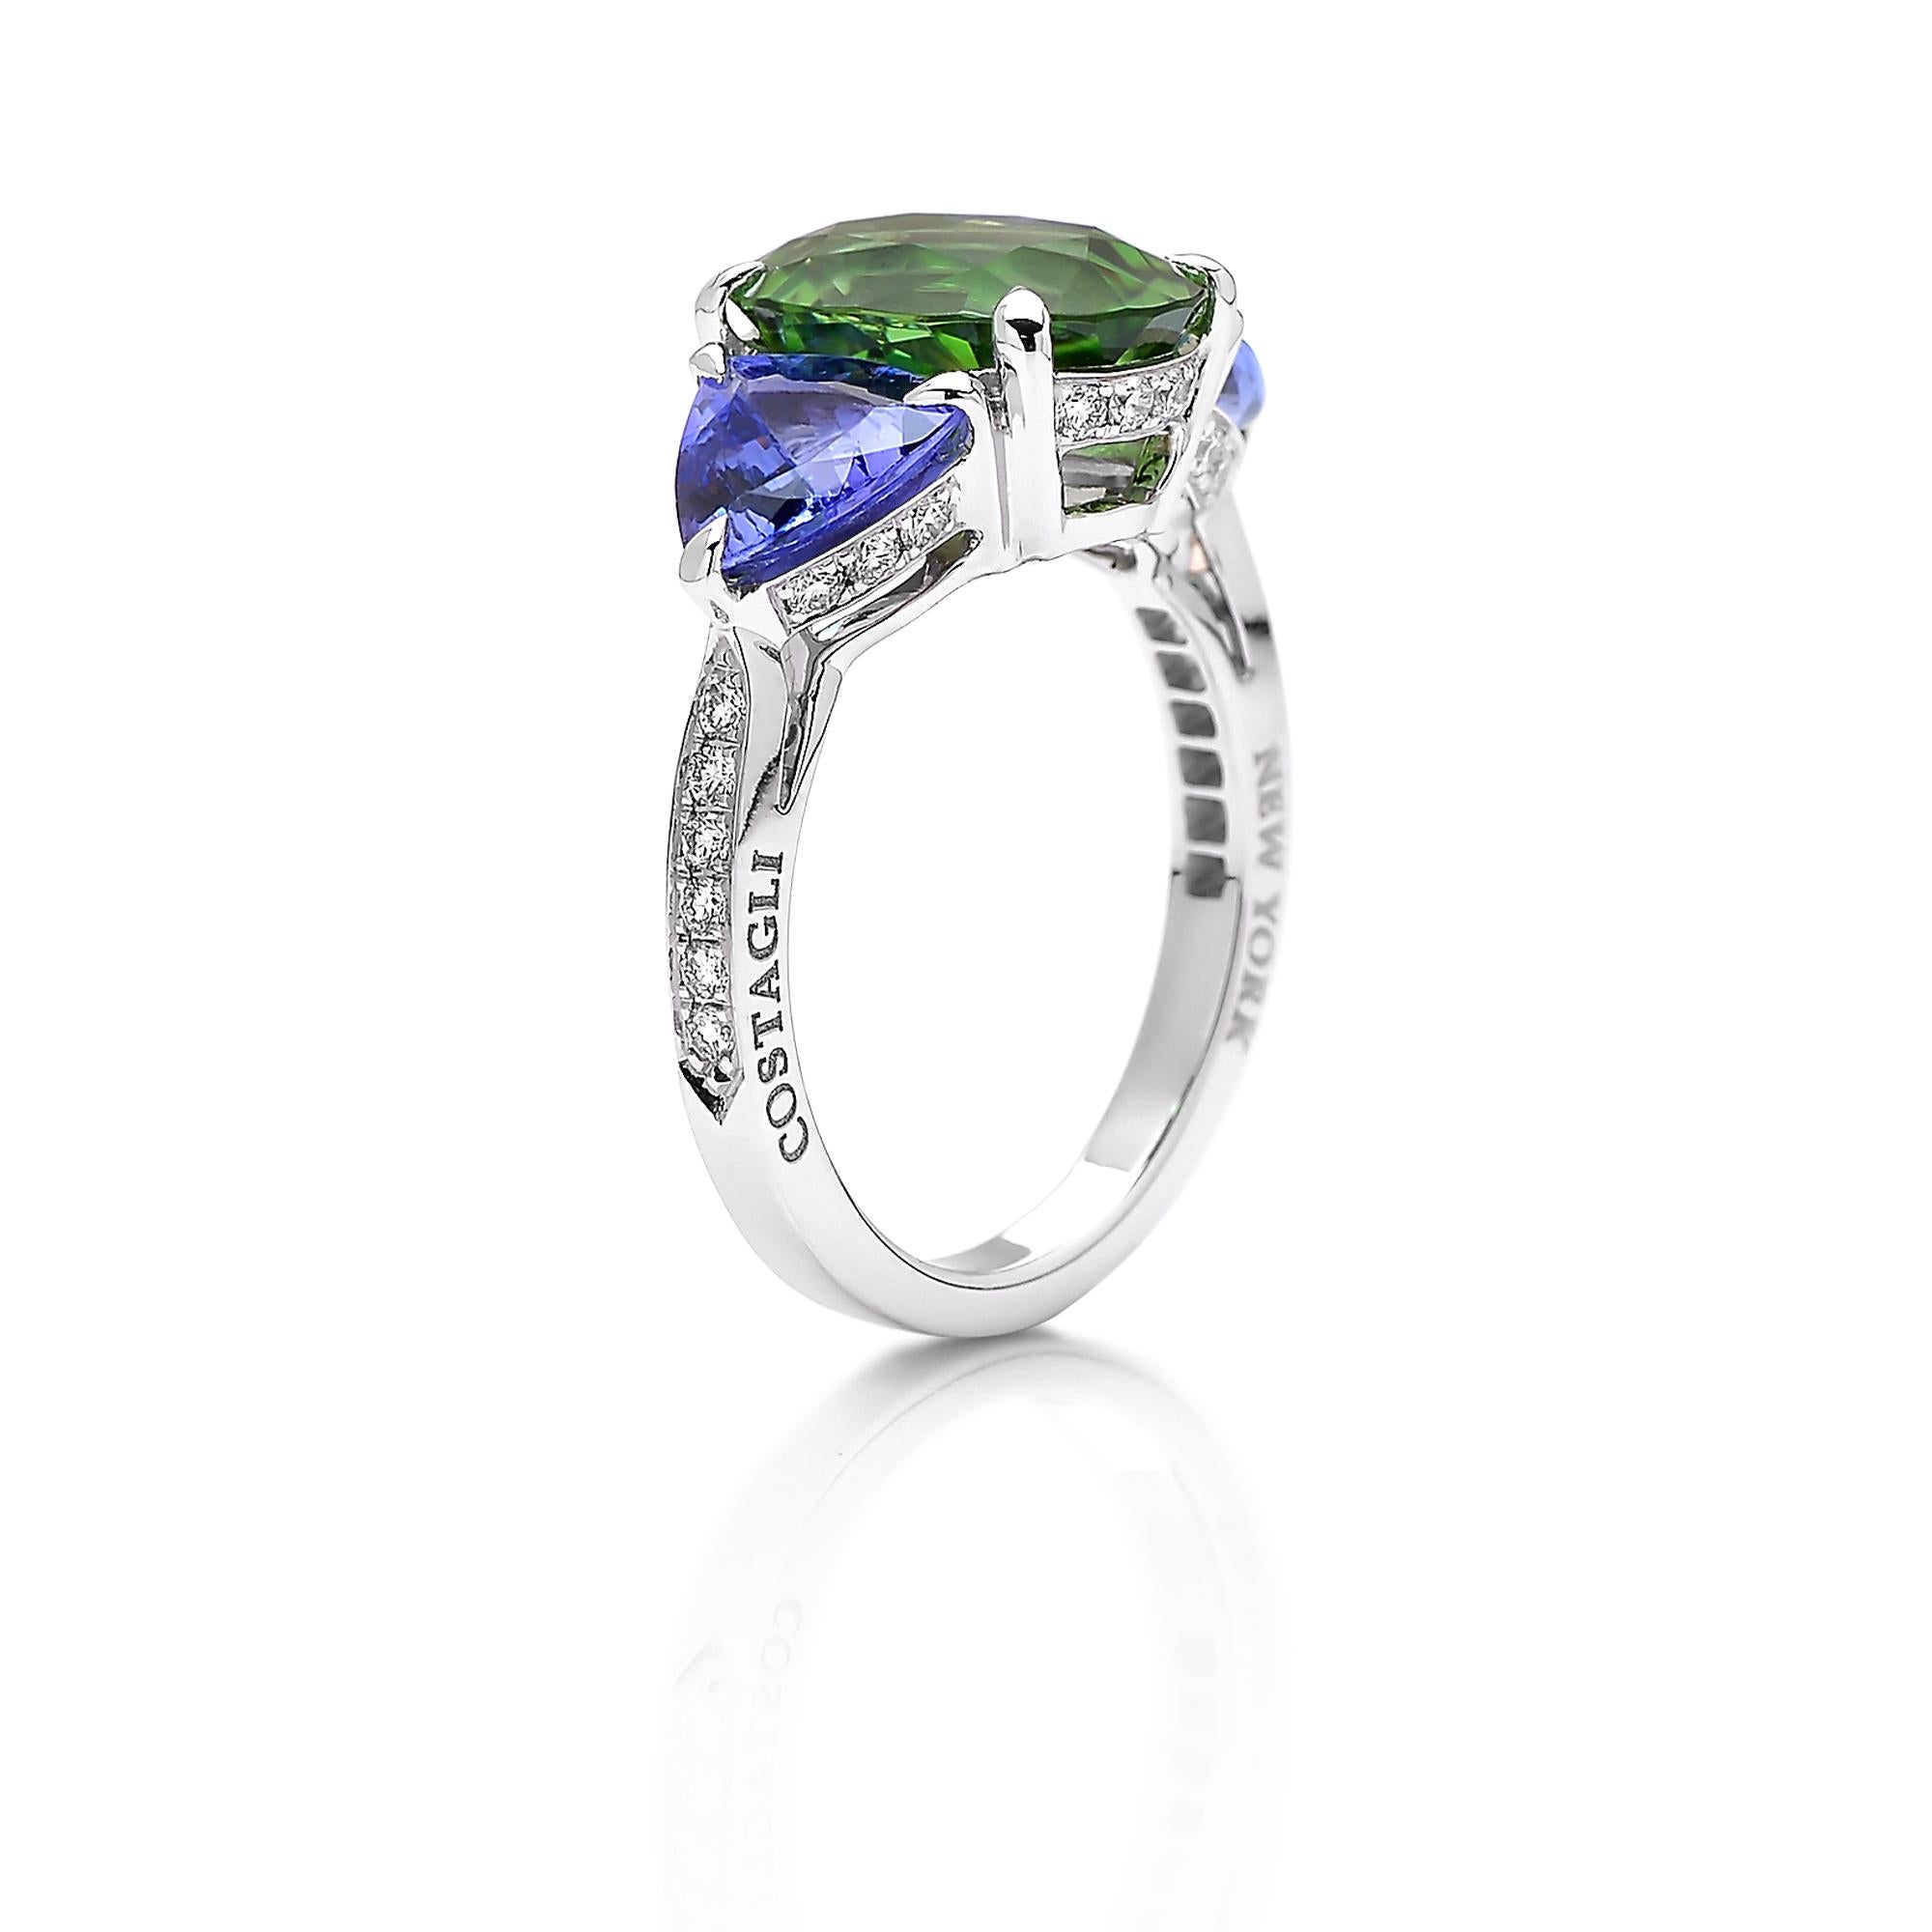 One of a kind 18 karat white gold ring features an oval-shape chrome tourmaline ring flanked by two trillion-shape tanzanites with round, brilliant diamond detailing. 

This ring is a testament to Paolo's expert eye for color. The chrome color of